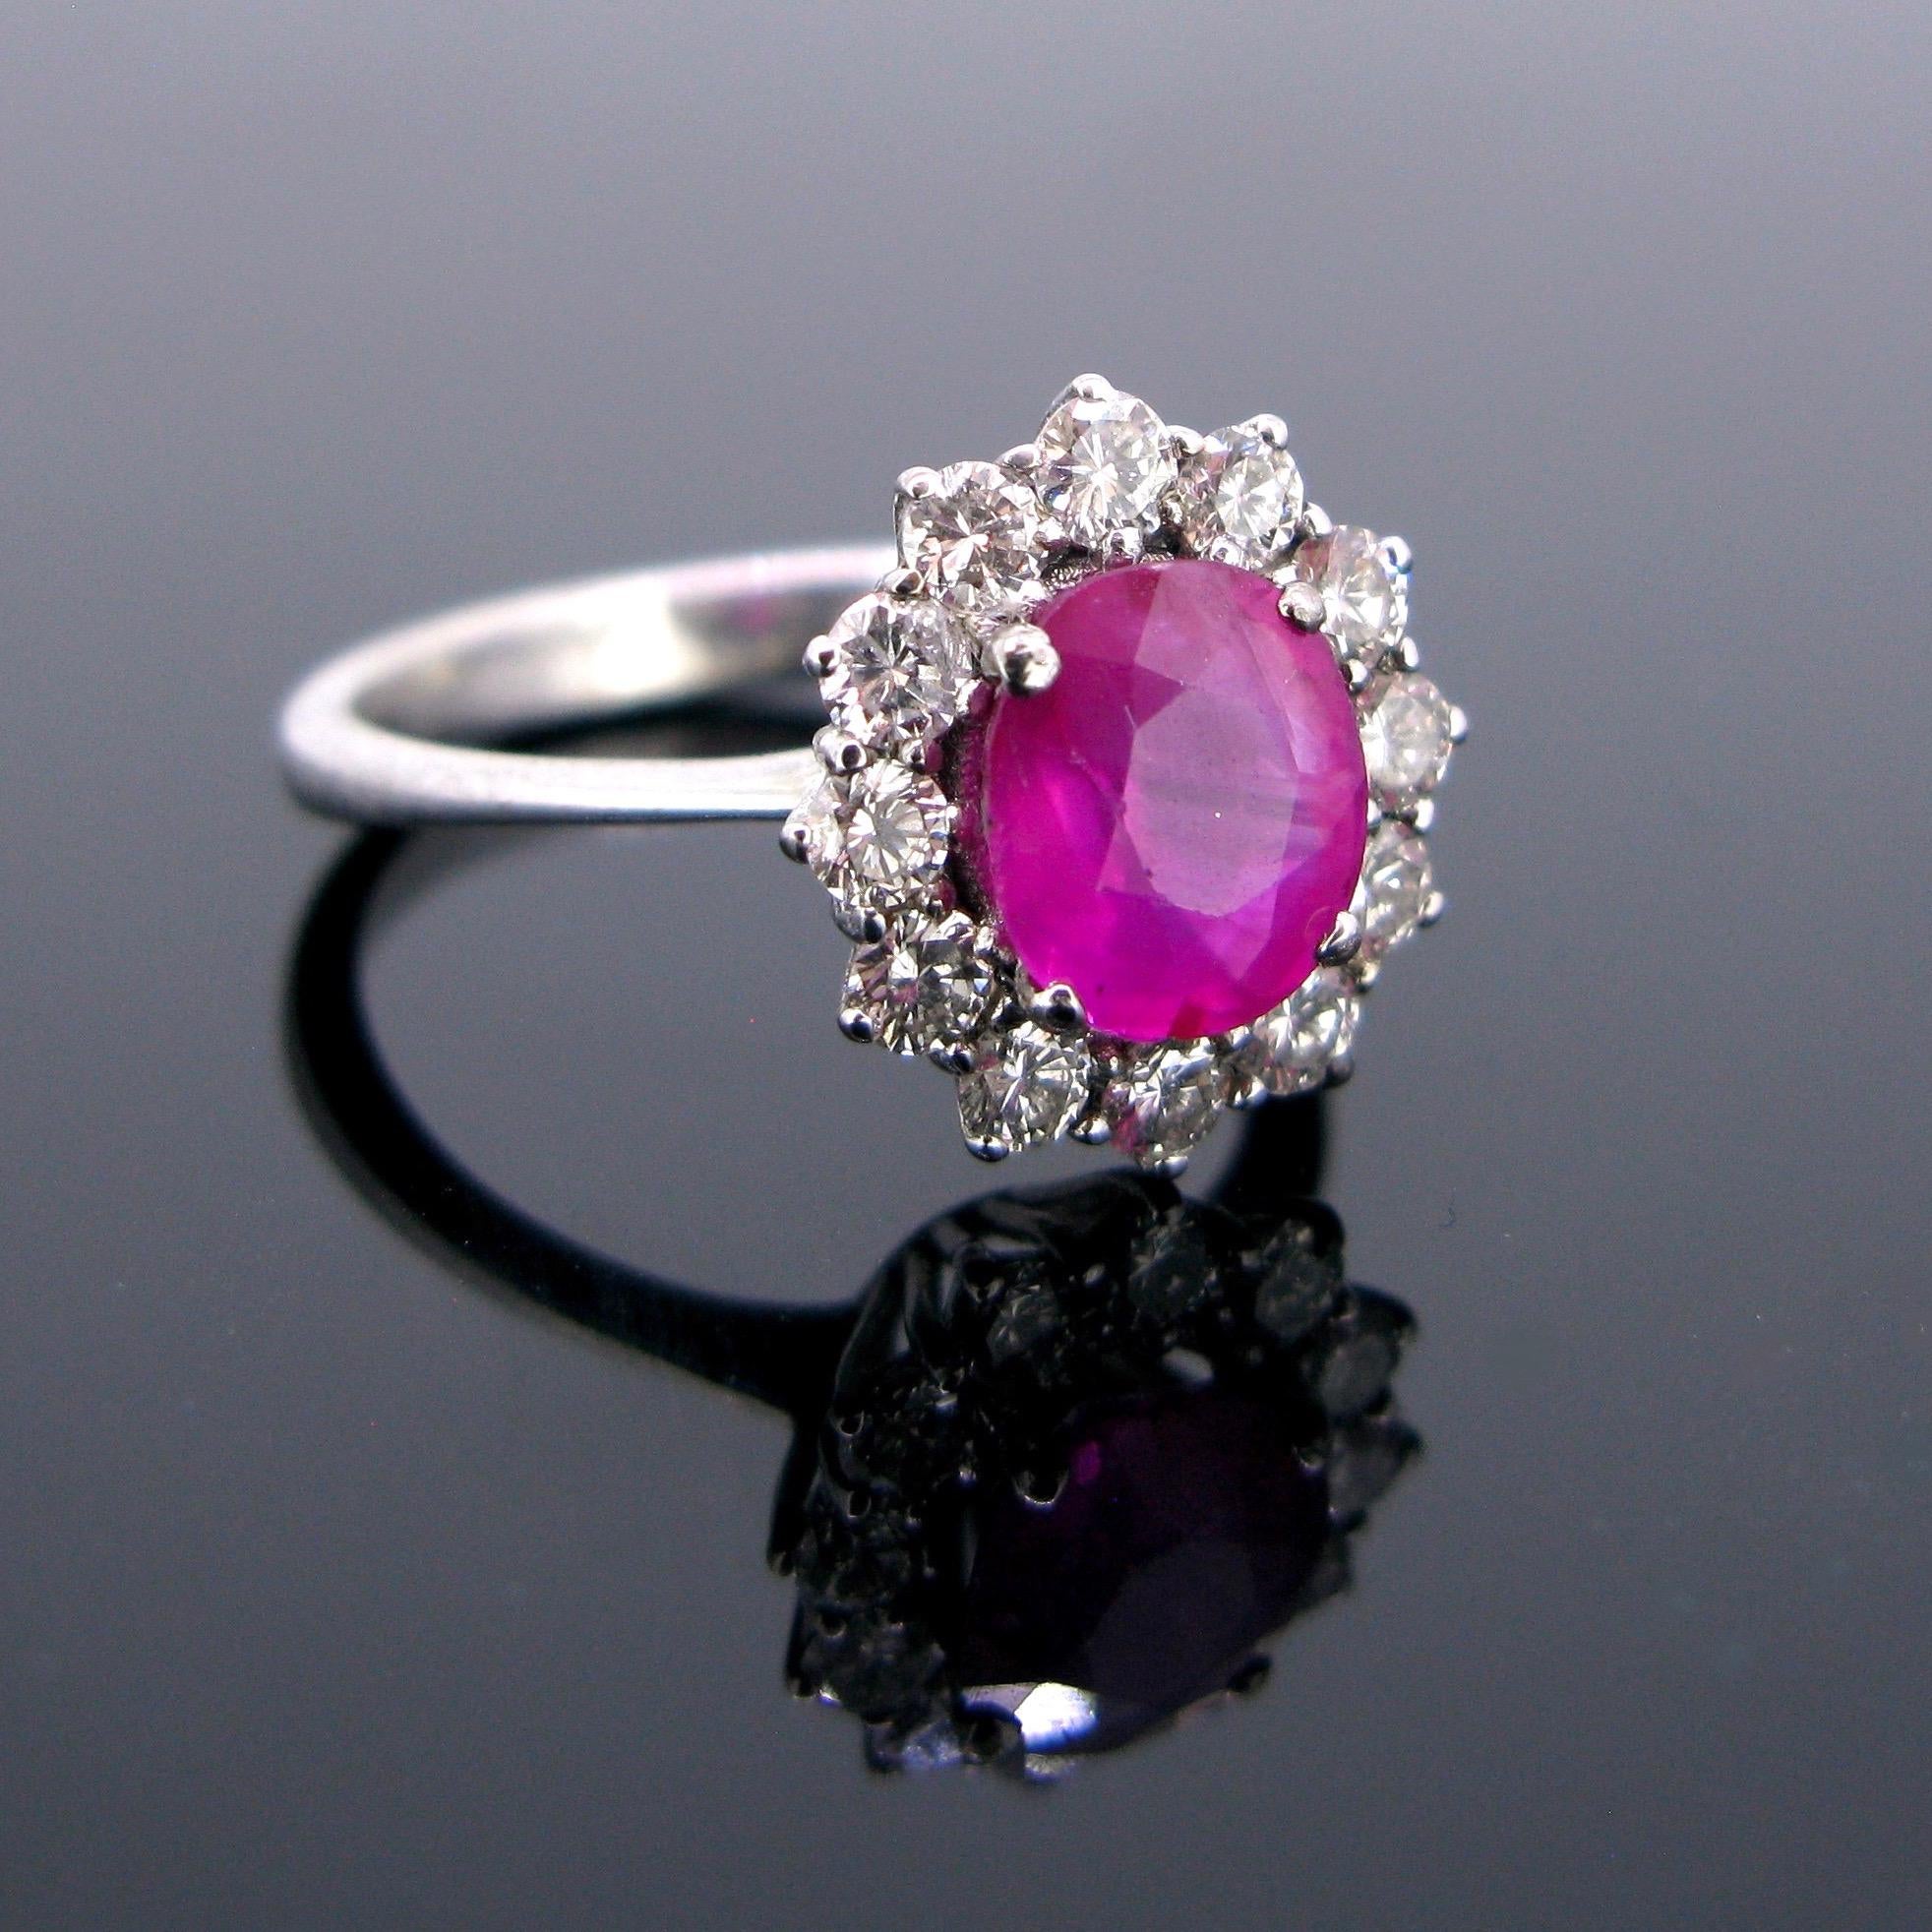 This elegant ring features a 2ct pink sapphire, it has been tested  with no indication of heating. It is surrounded by 12 brilliant cut diamonds with a total carat weight of 1.20ct.T his is the perfect example of a daisy ring.

Stone:   Natural Pink